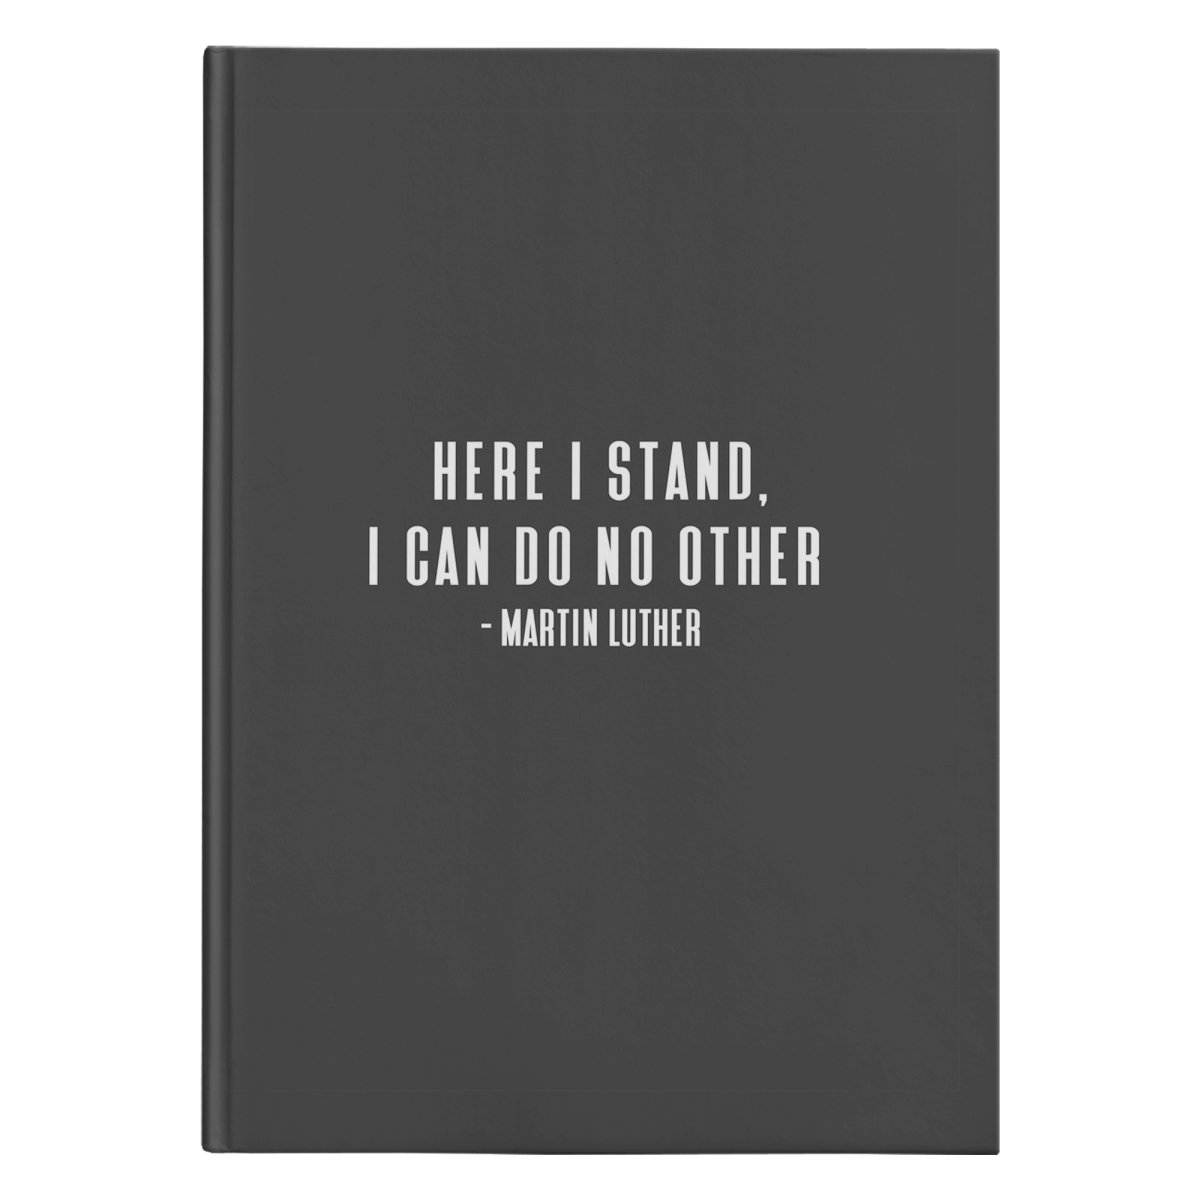 Here I Stand (150 Page Hardcover Journal) - SDG Clothing